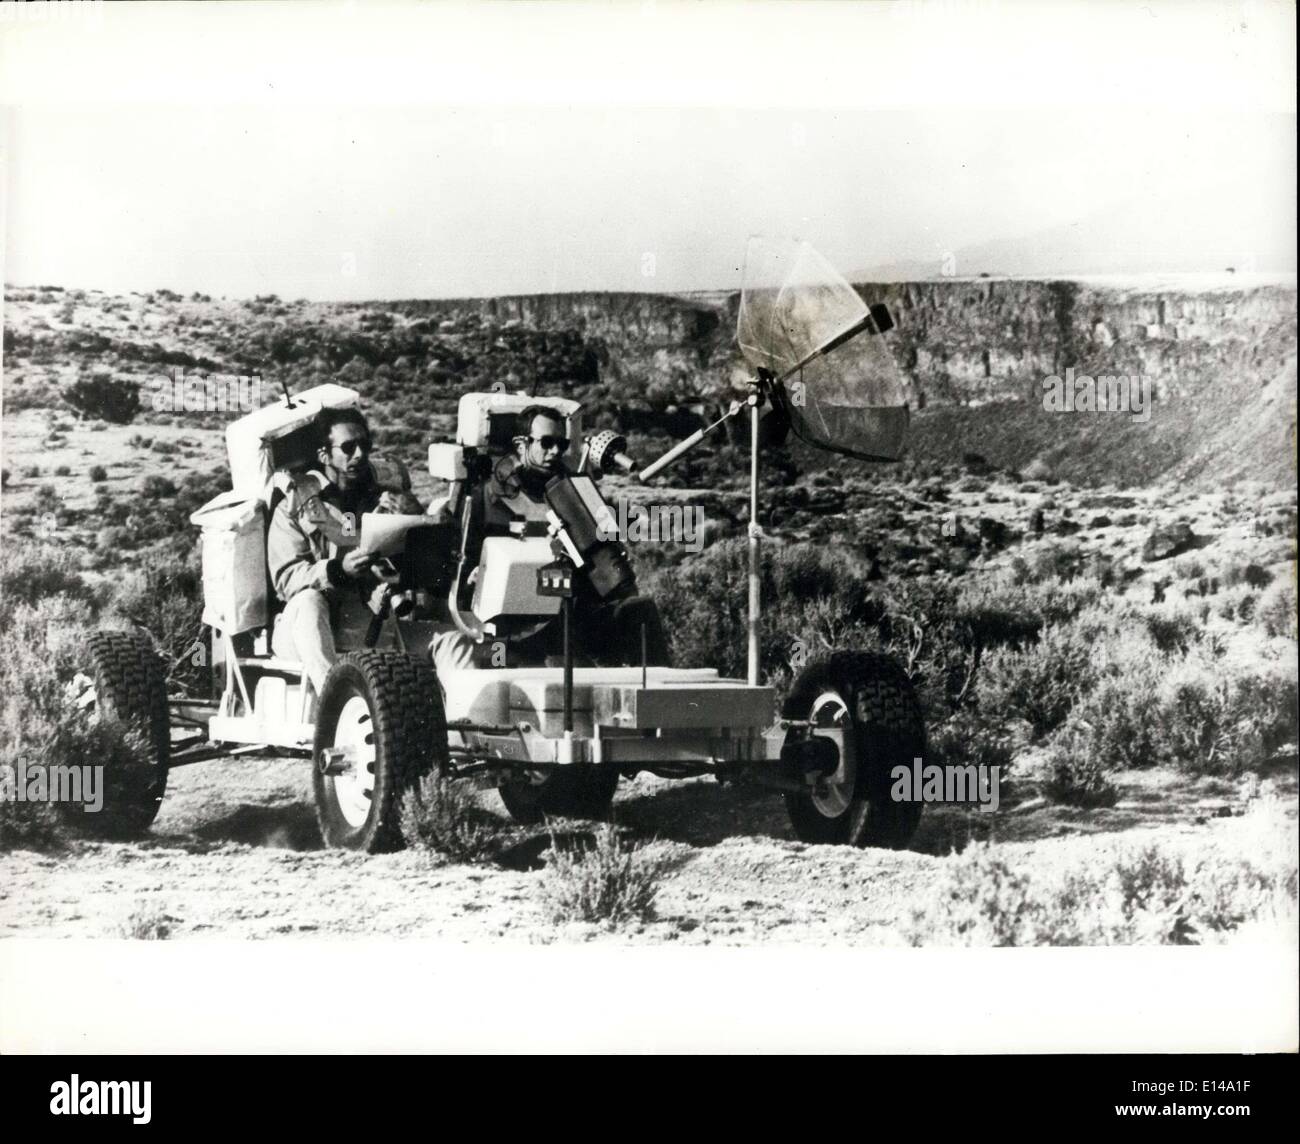 Apr. 17, 2012 - Buggy ride on the moon: James B. Irwin (left) and David R. Scott, Apollo 15 astronauts, try out a vehicle similar to the lunar roving vehicle called the ''Grover'', during a training session at the Rio Grande Gorge, Taos, New Mexico, on geological features expected to be similar to the Hadley Appenine area of the moon, where they are expected to land in late July. Stock Photo